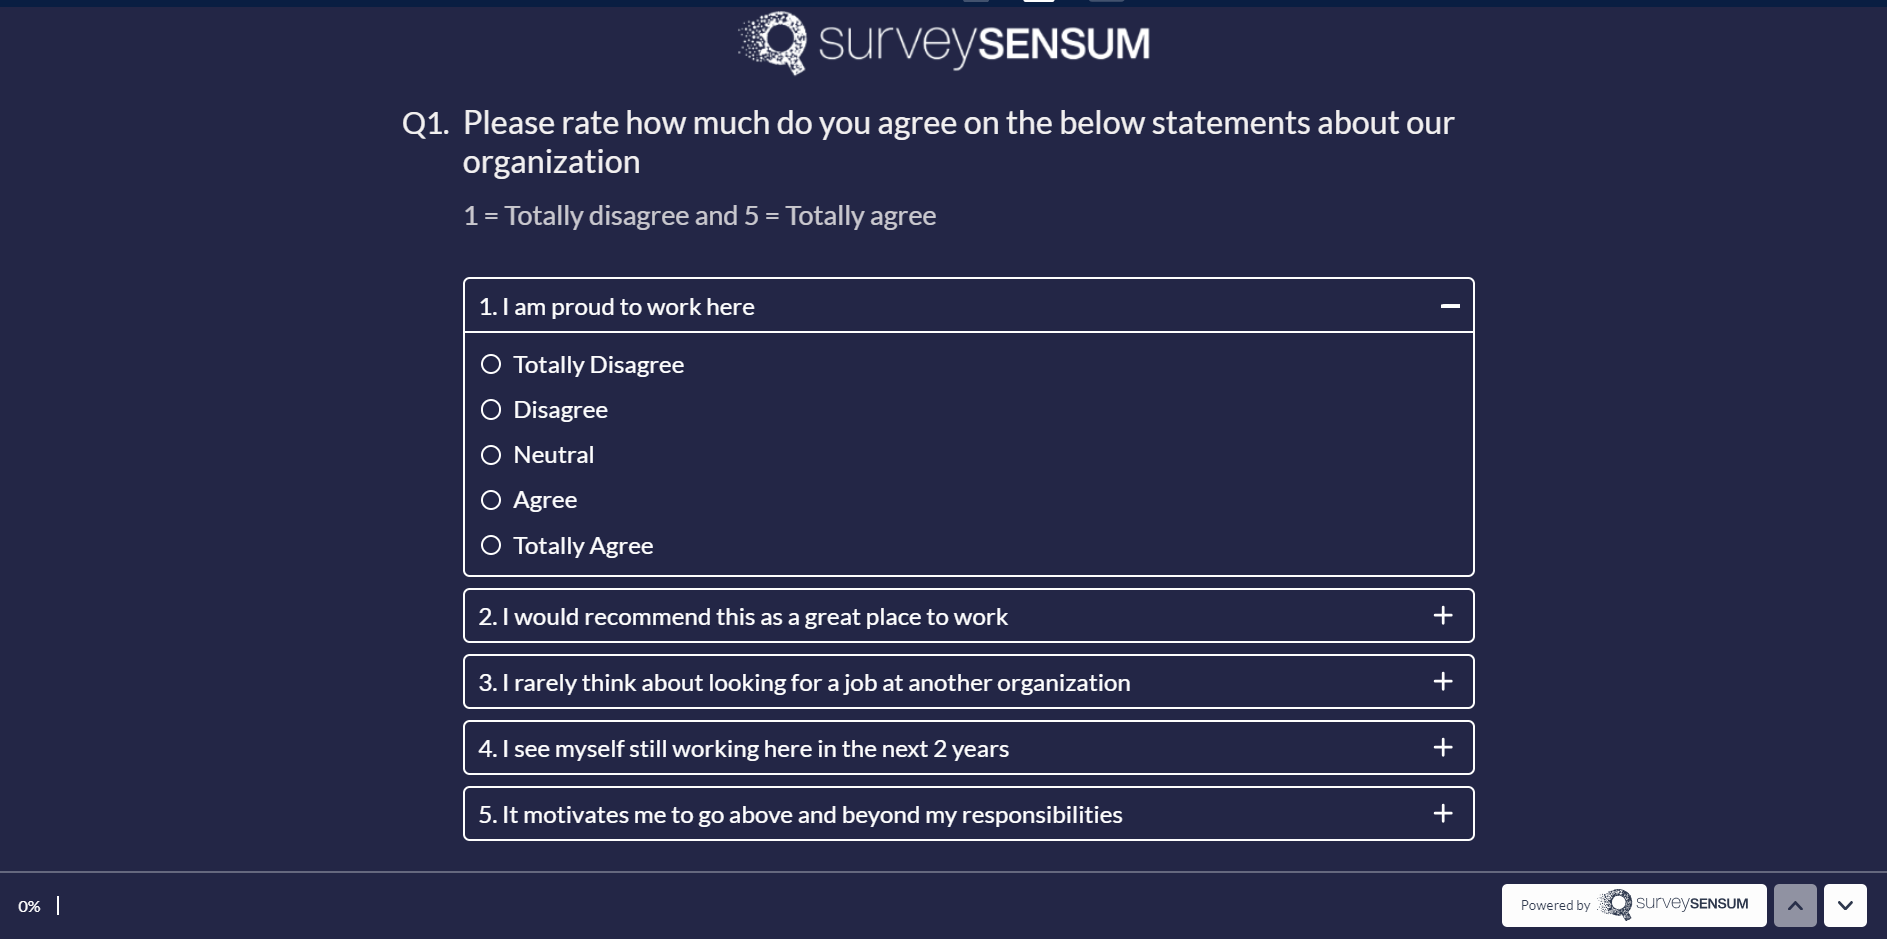  the image shows a question sample for the pulse surveys directed to gather quick feedback from employees. 